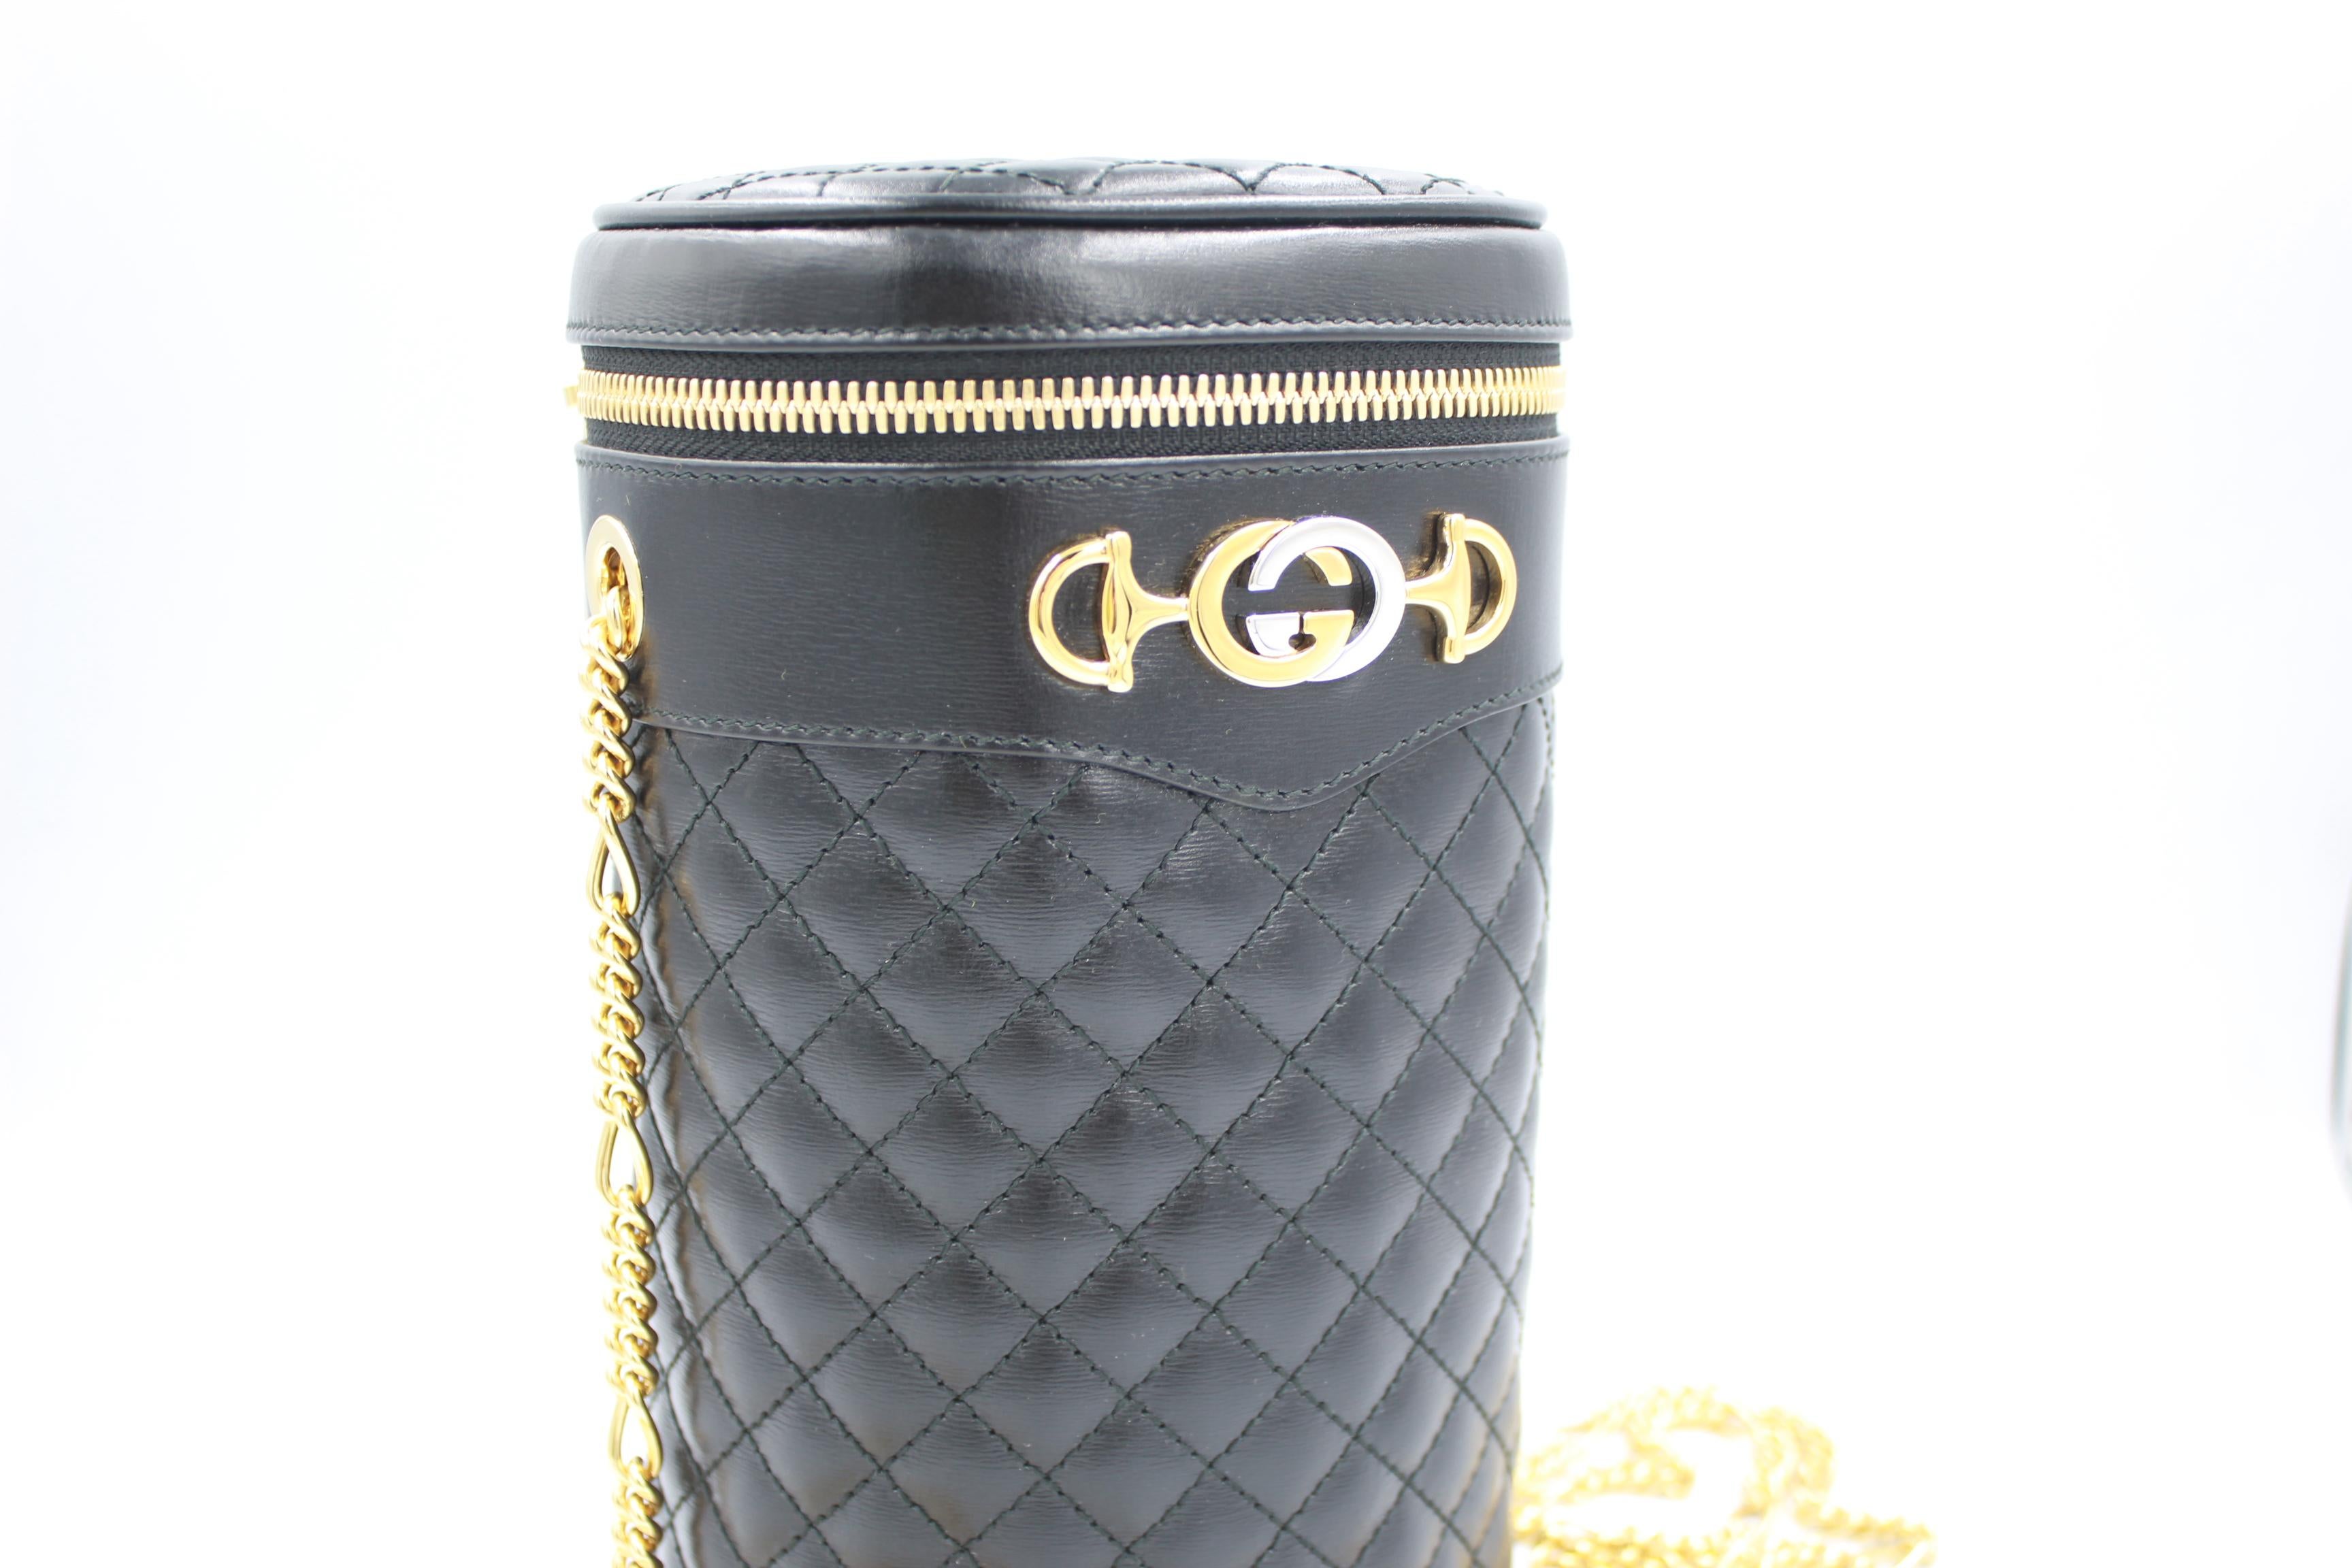 Gucci bag in black leather and gold chains.
Can be worn as a belt bag or crossbody.
Very good condition.
22cm x 12cm x 9cm